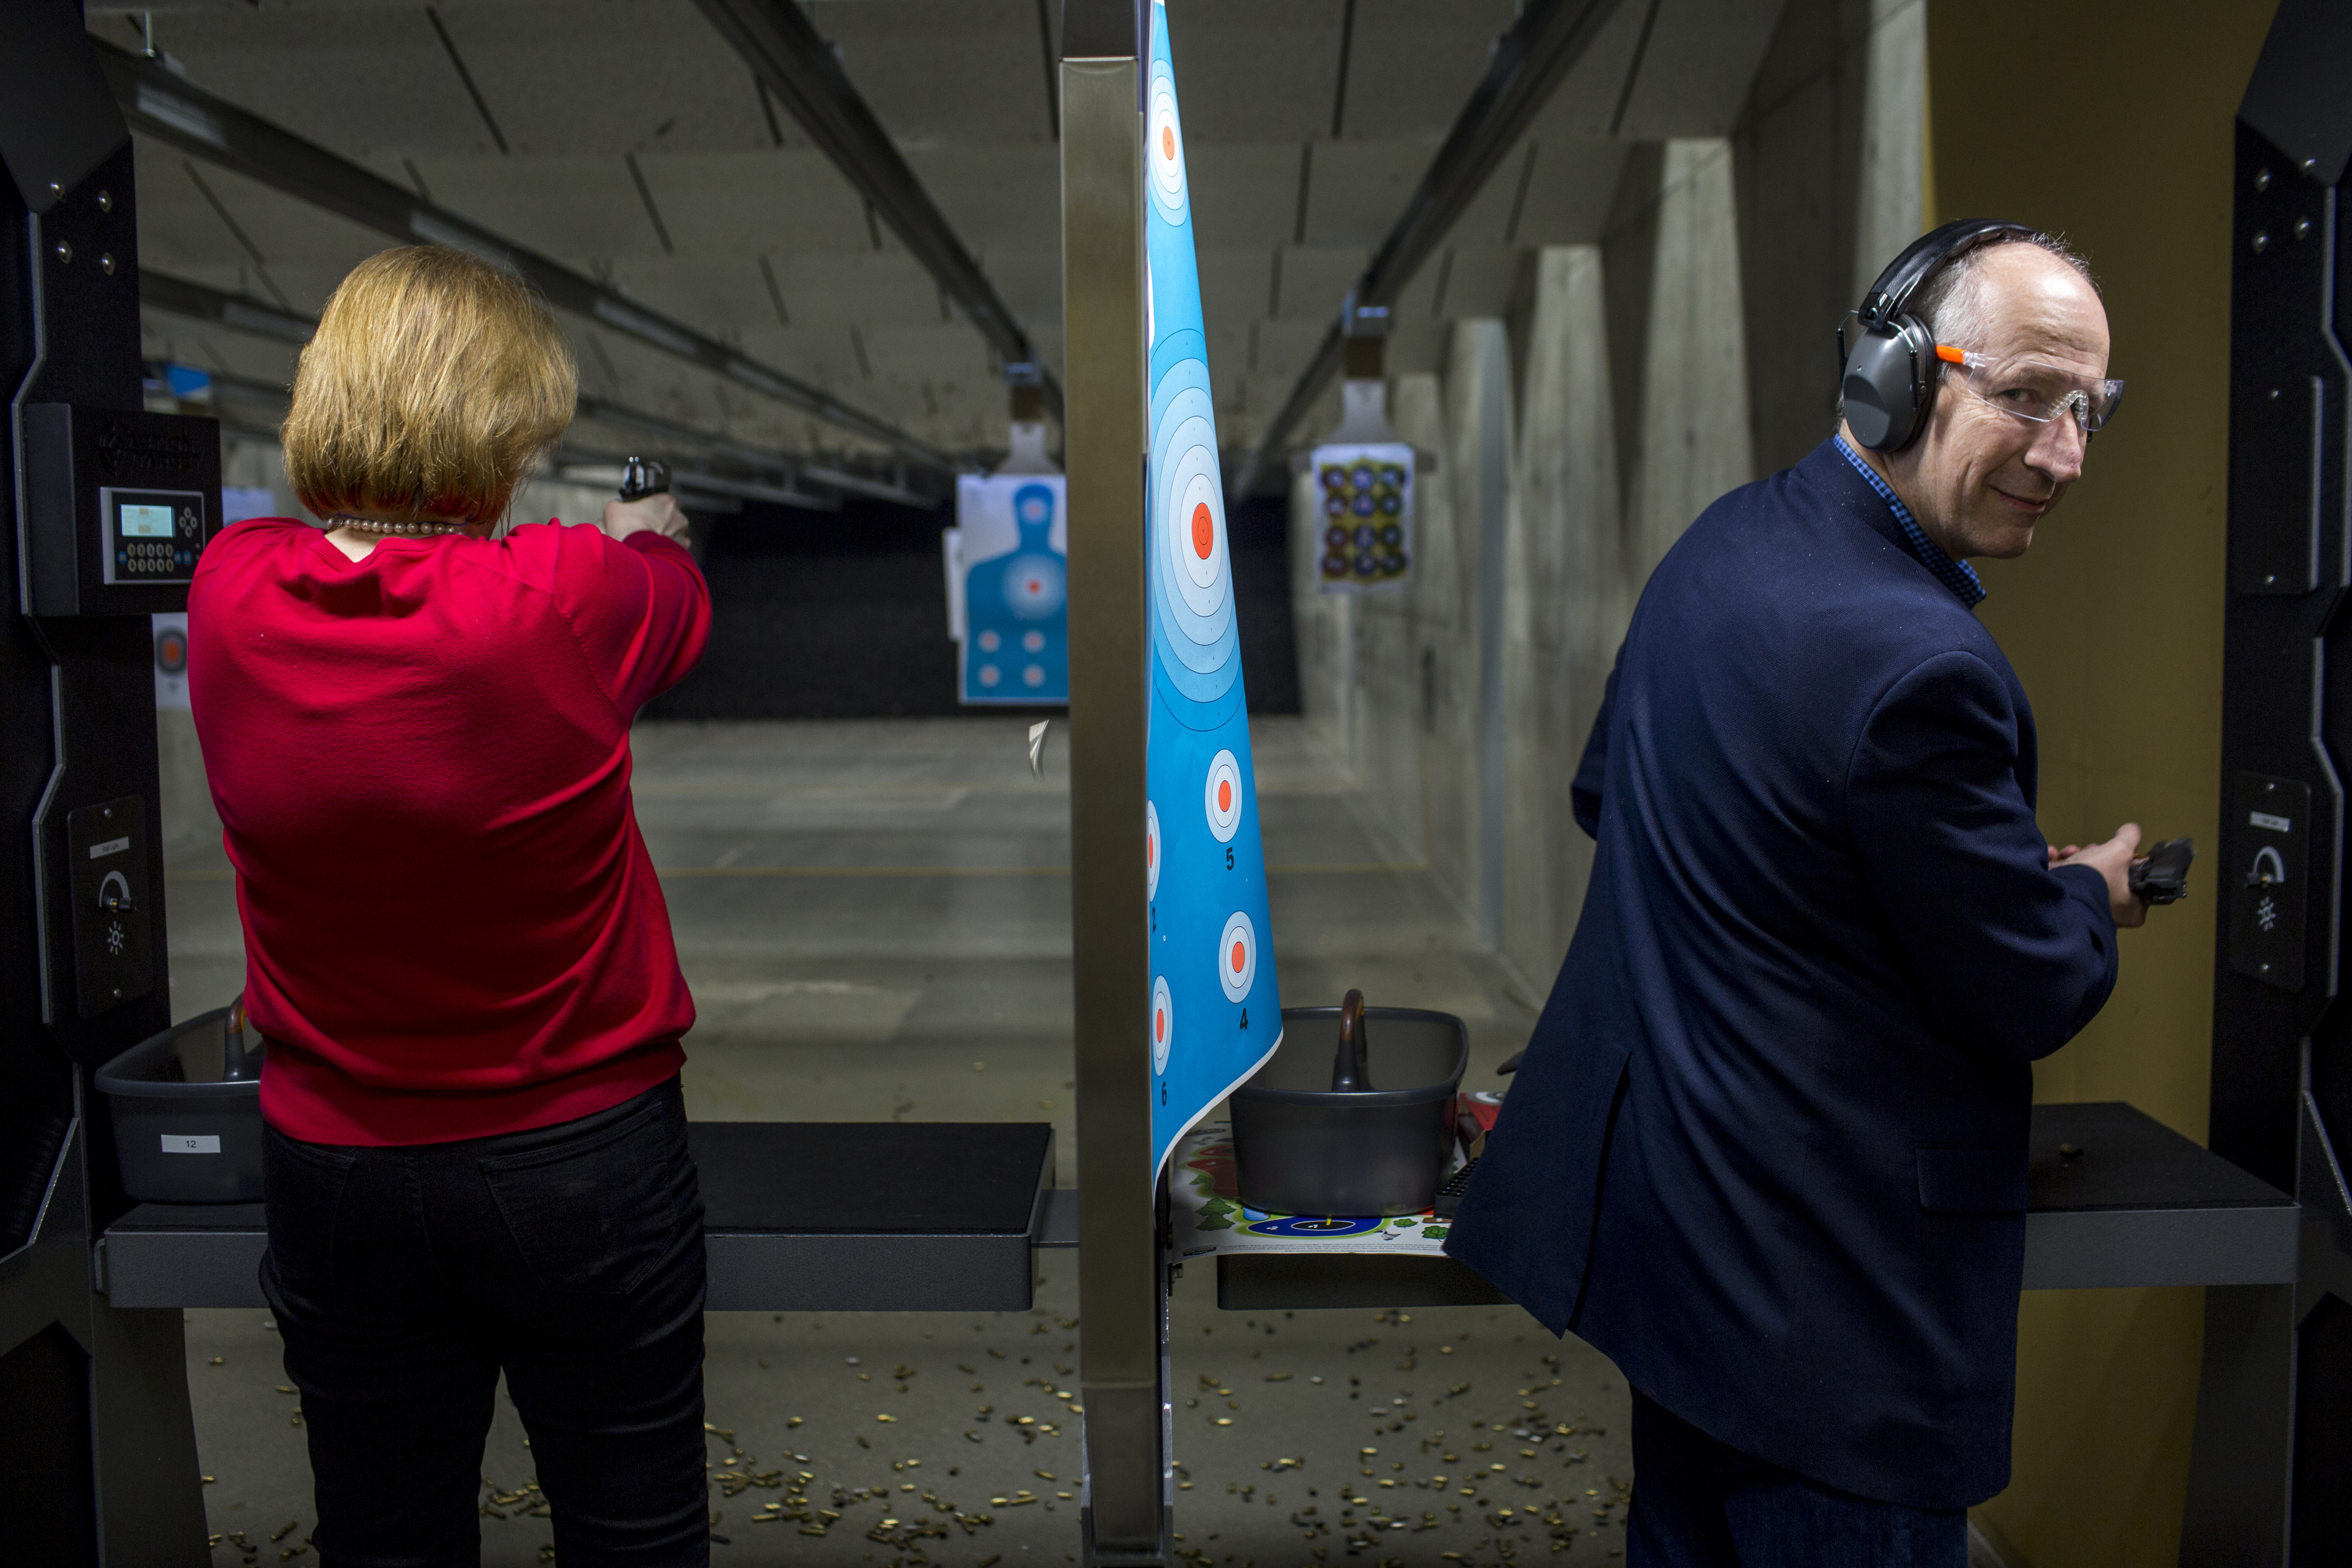 Former Arkansas Gov. Mike Huckabee's wife, Janet, campaigns at the Crossroads shooting range in Johnston, Iowa on Jan. 30, 2016.